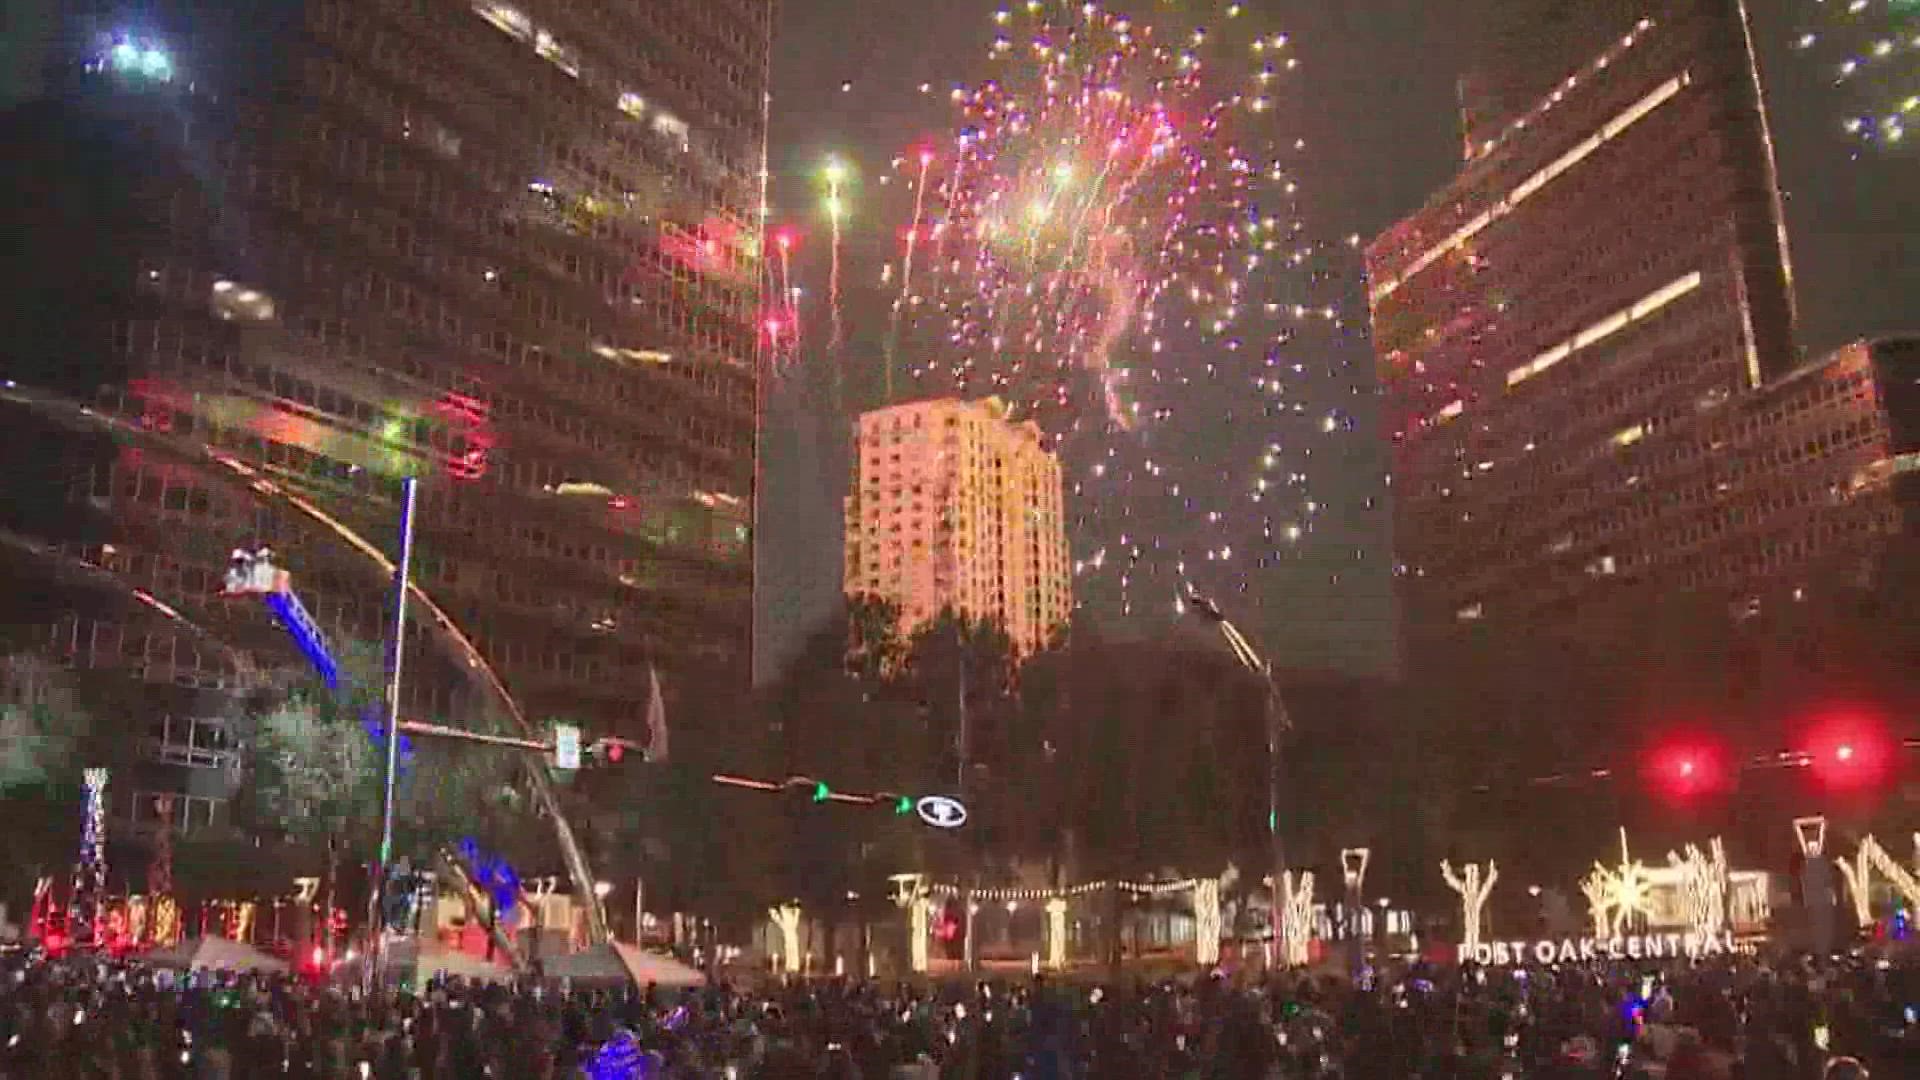 It's a Houston tradition filled with music, lights and a fireworks show and it returned to an in-person celebration after COVID canceled last year's event.